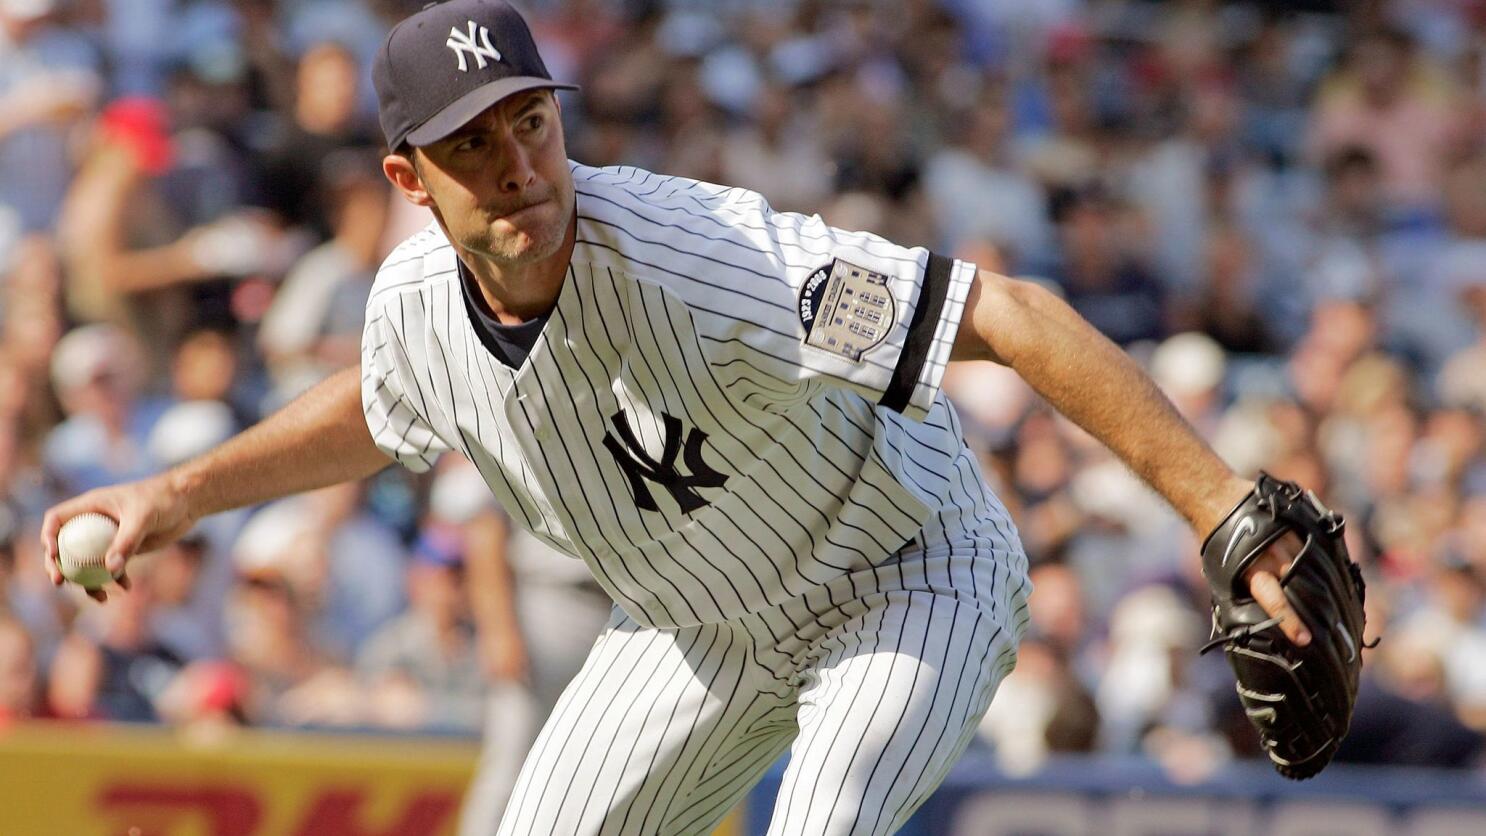 Case study: Mike Mussina's Hall credentials - The San Diego Union